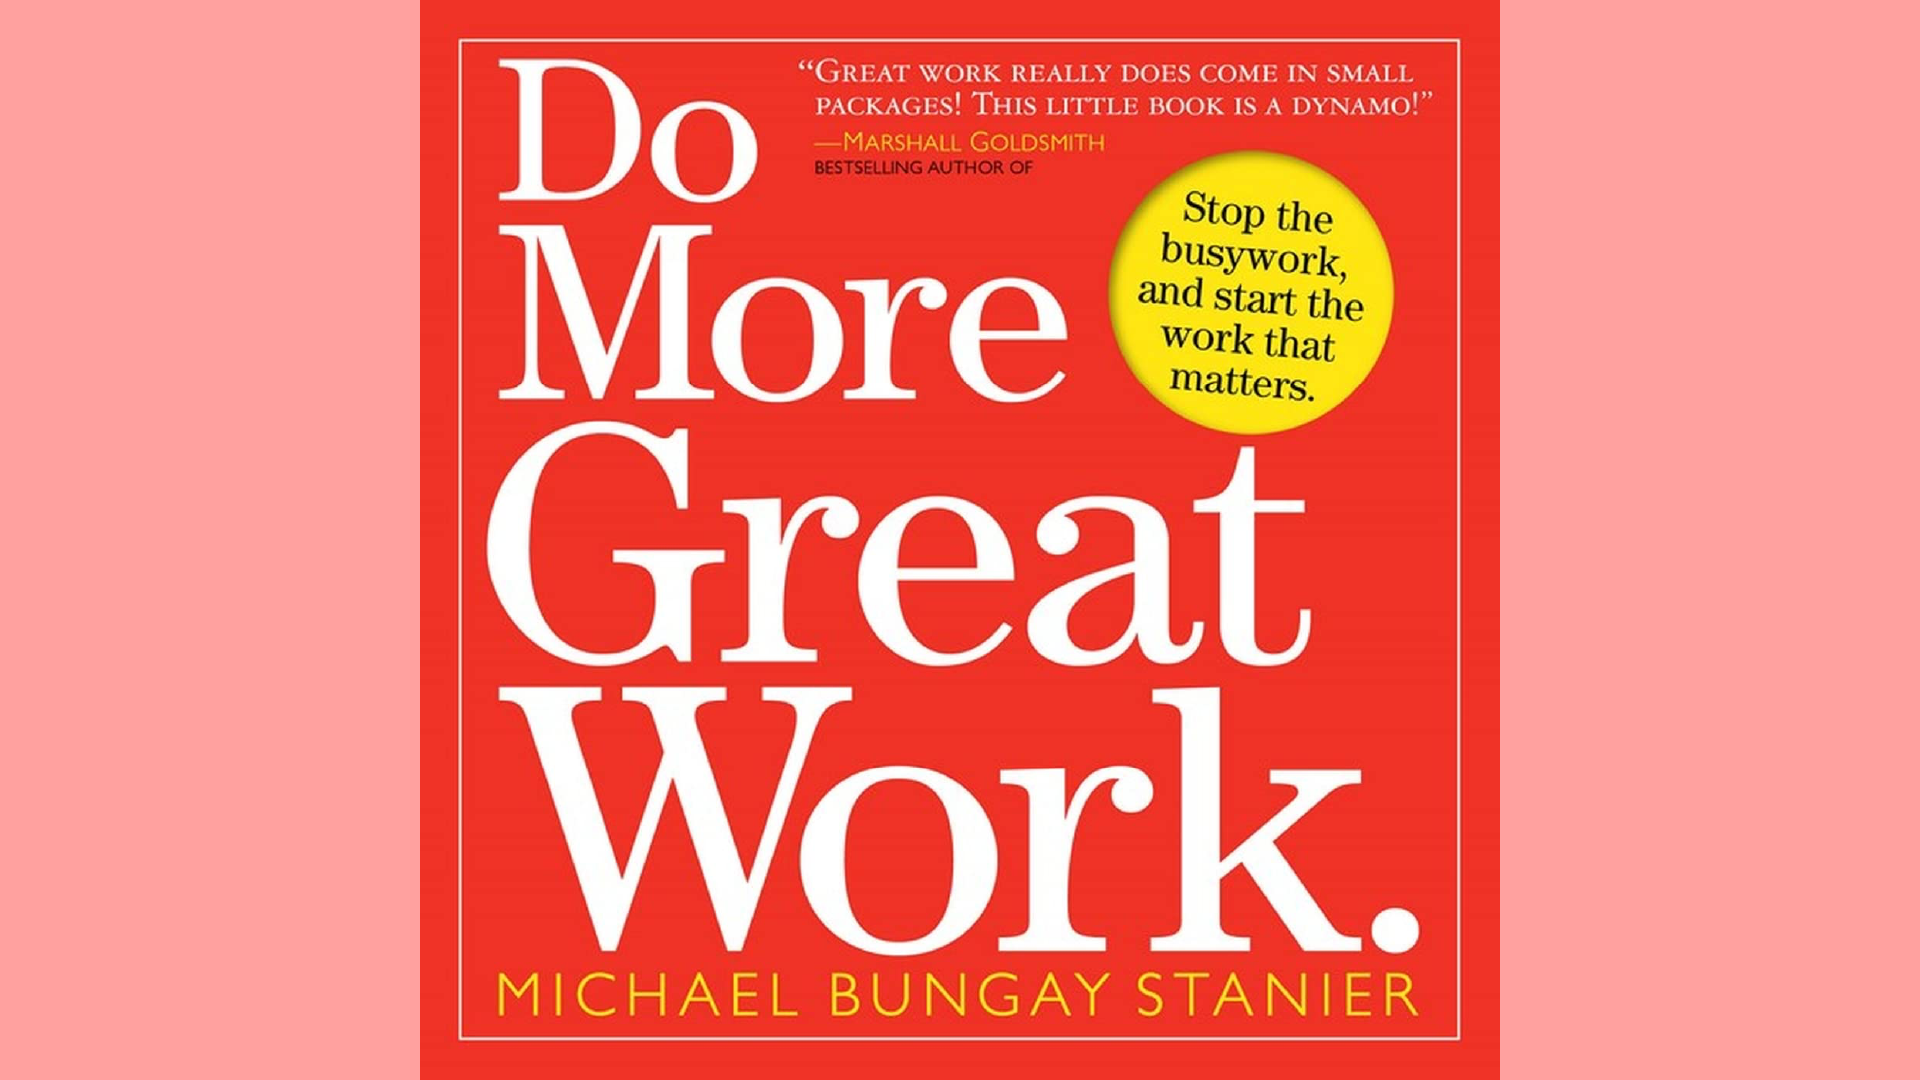 Summary: Do More Great Work by Michael Bungay Stanier